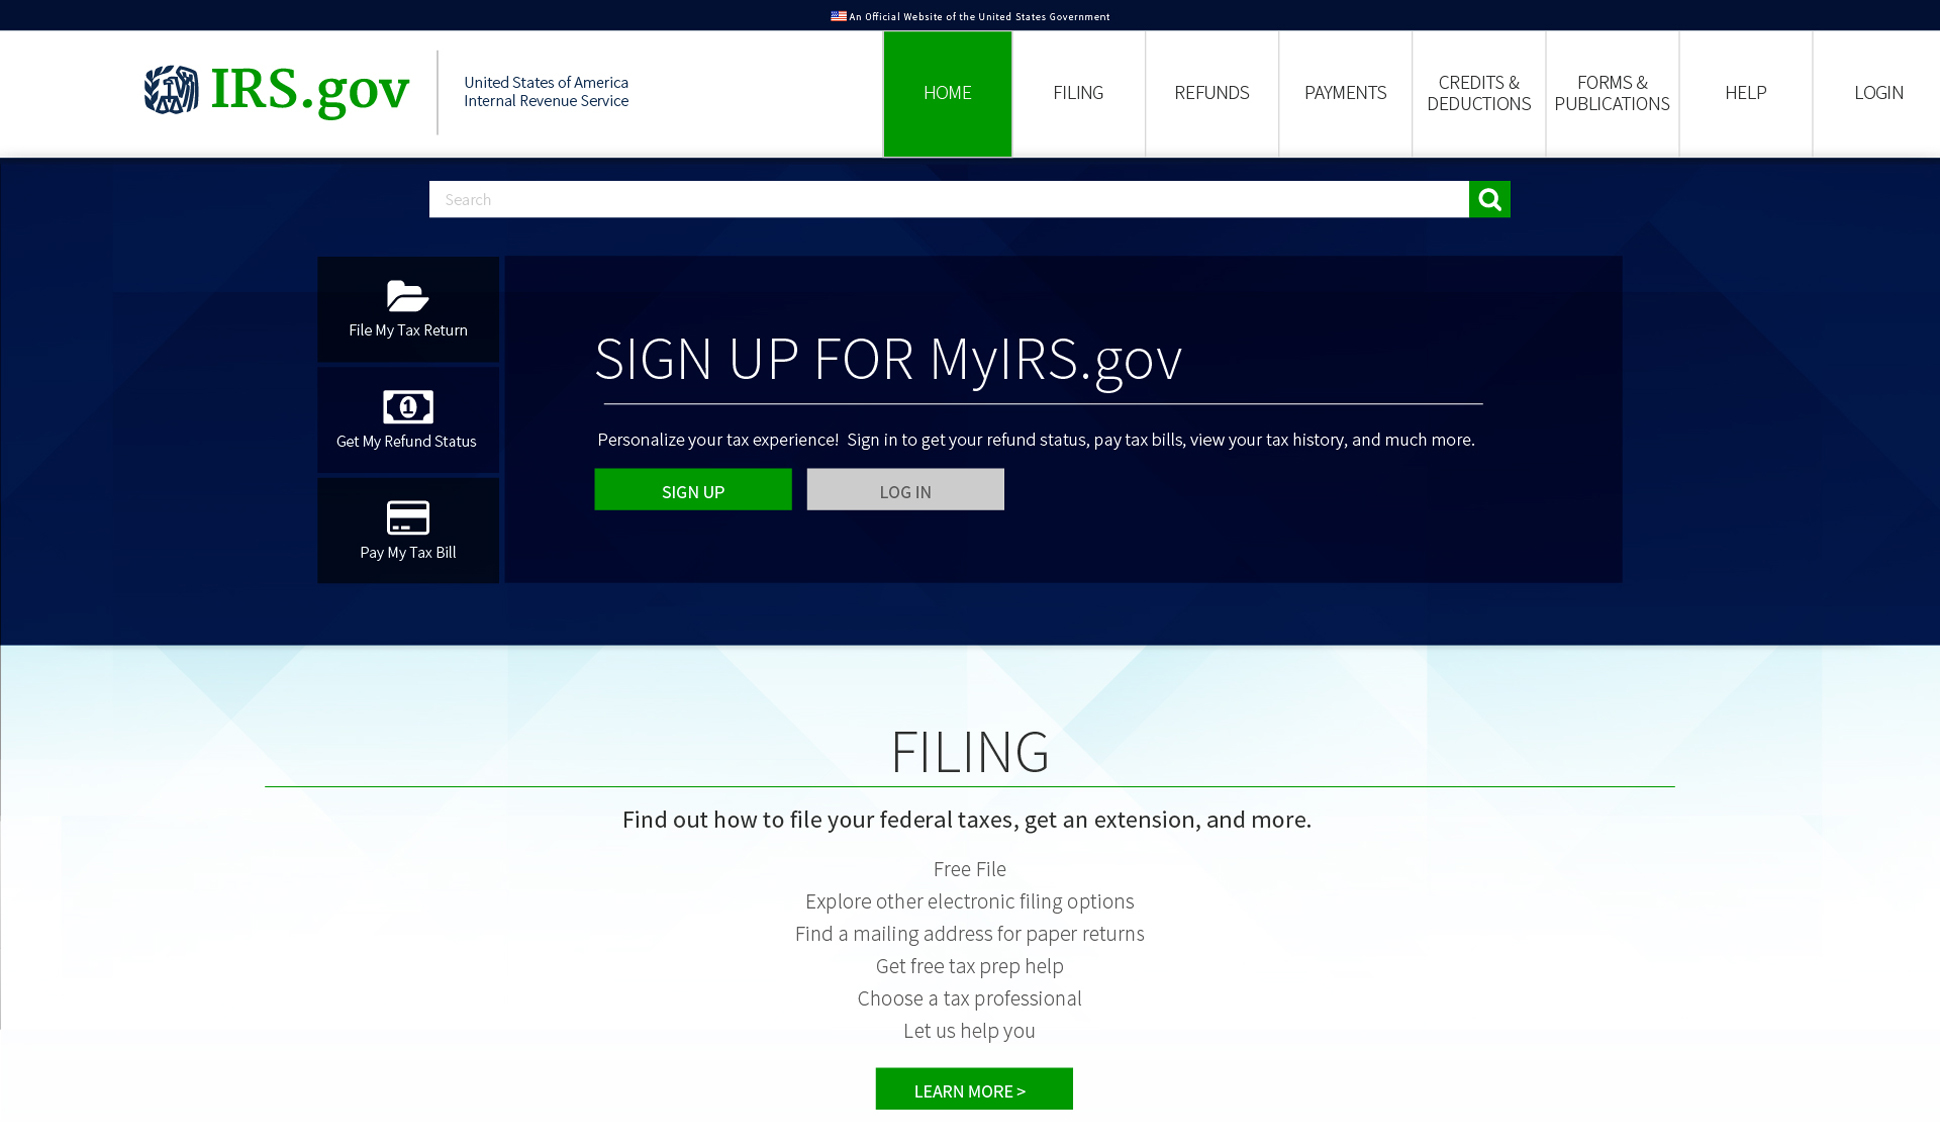 A page from a tax design challenge submission. A newly designed IRS.gov encourages users to sign up for MyIRS.gov in order to personalize their tax experience. Using this site they can get their refund status, pay tax bills, and more.